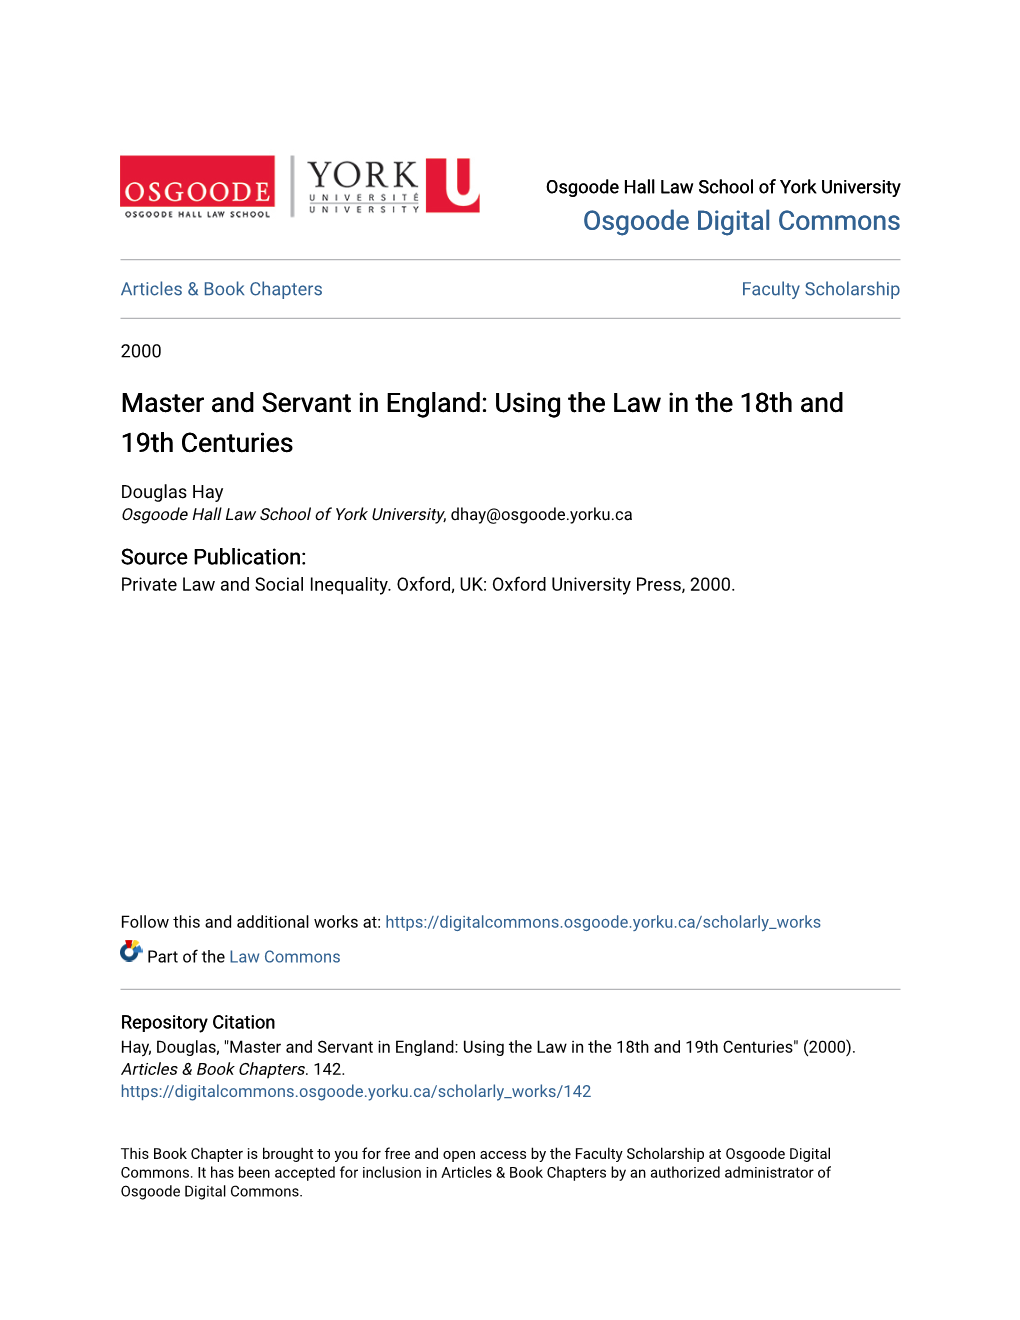 Master and Servant in England: Using the Law in the 18Th and 19Th Centuries